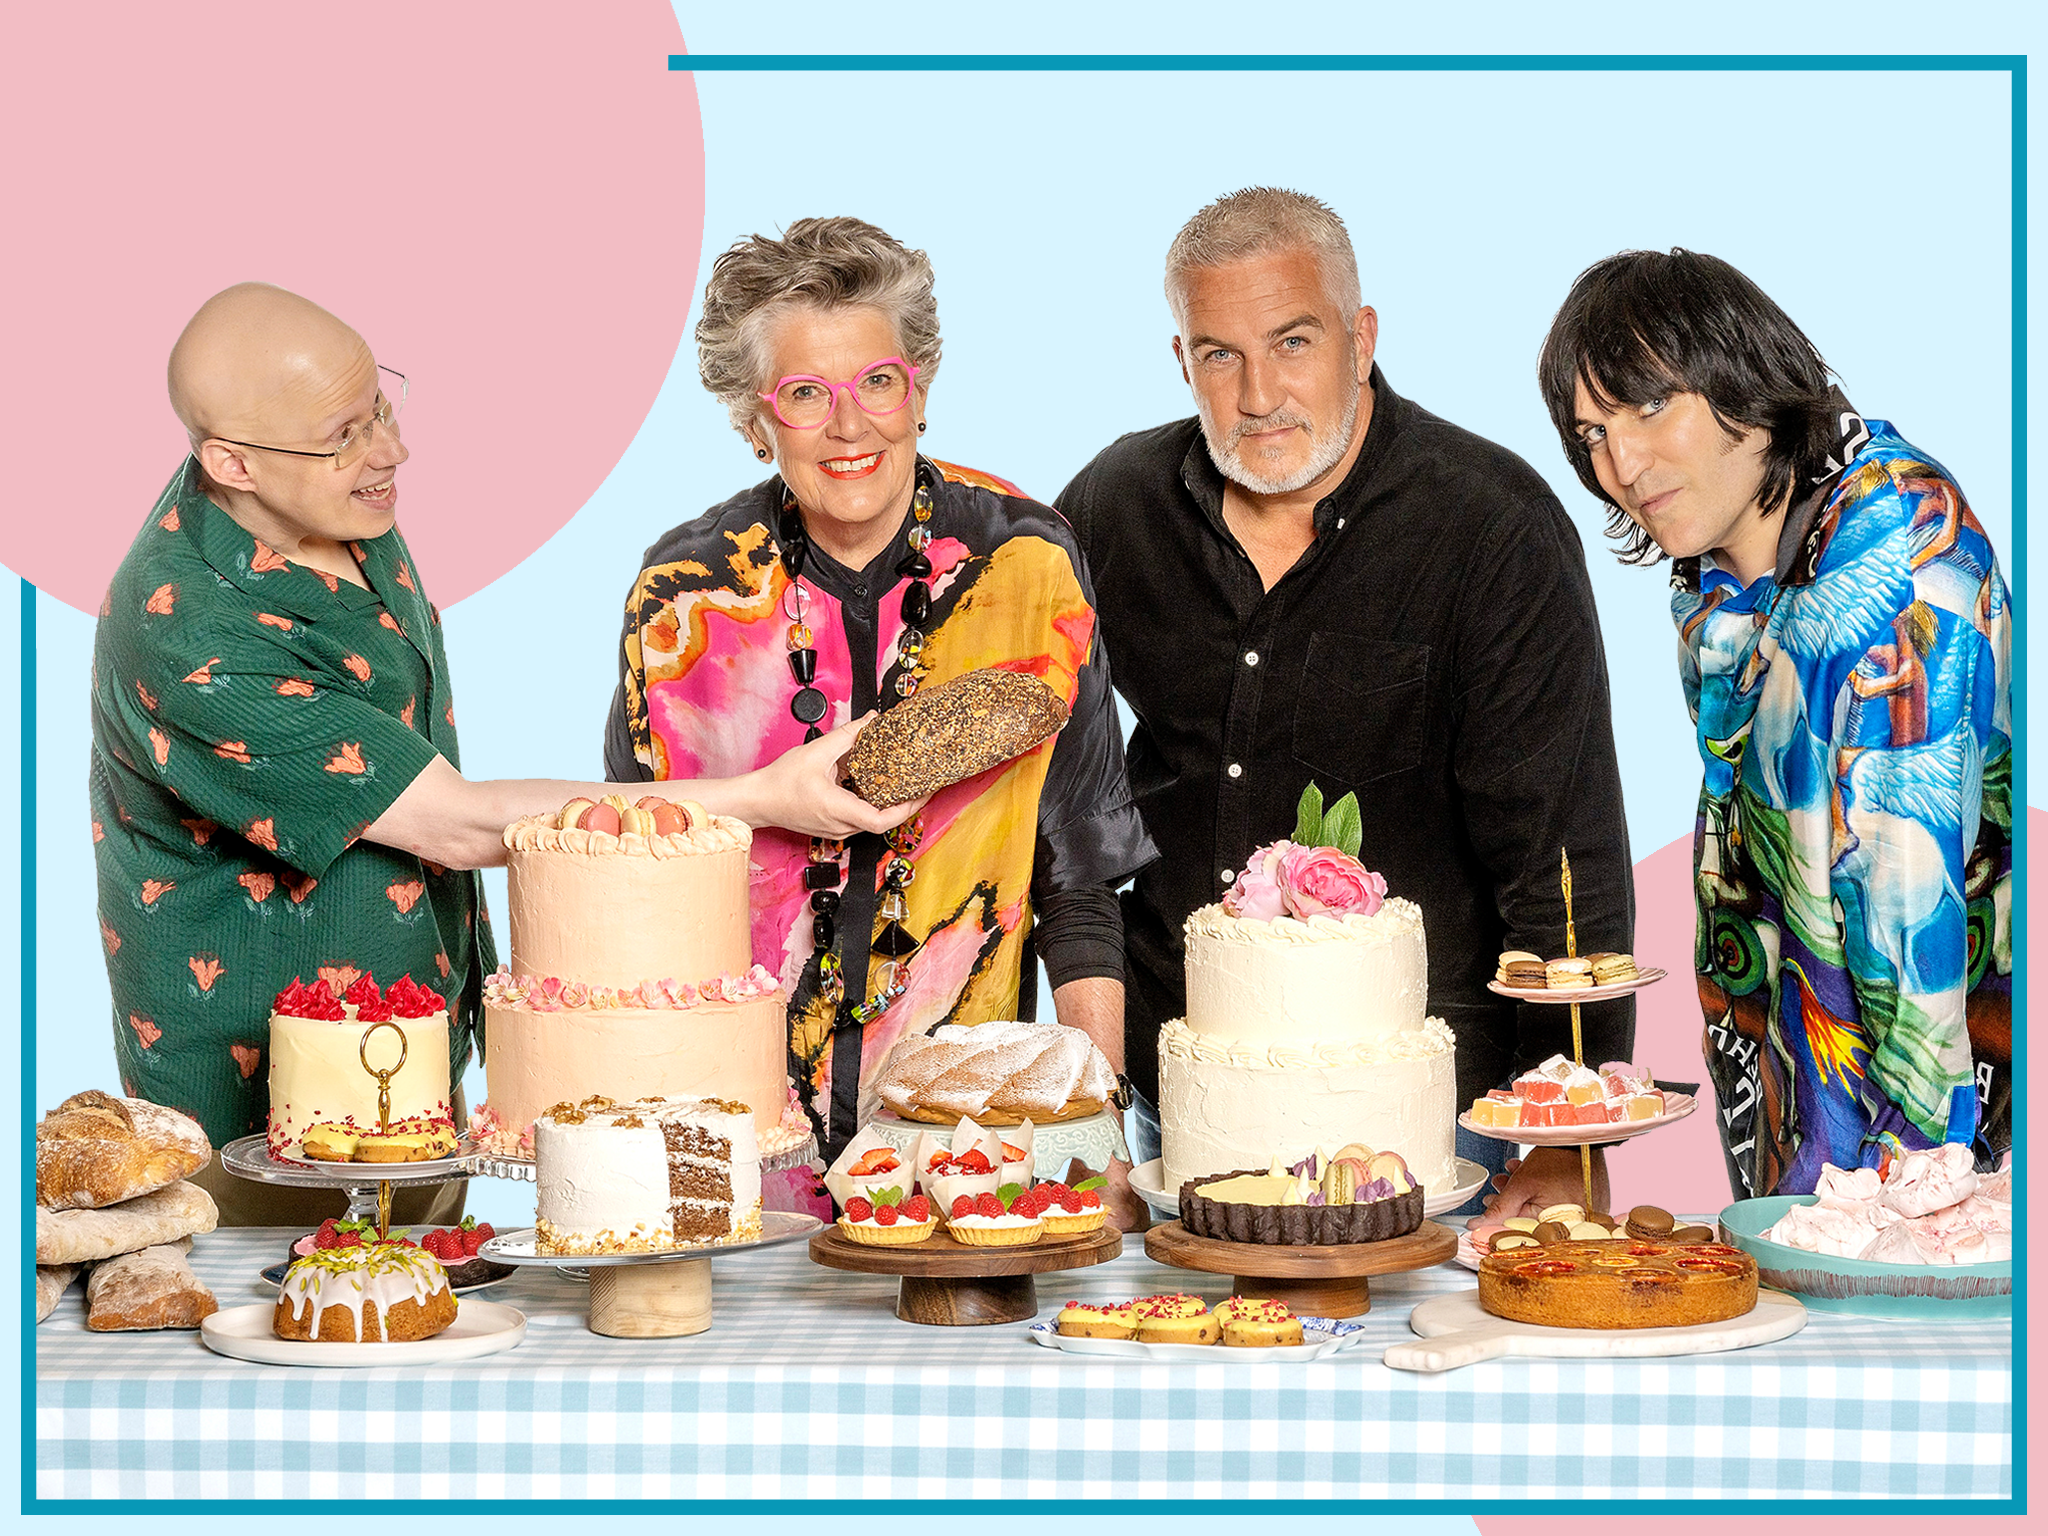 https://static.independent.co.uk/2022/09/13/11/bake-off-indybest-gbbo.png